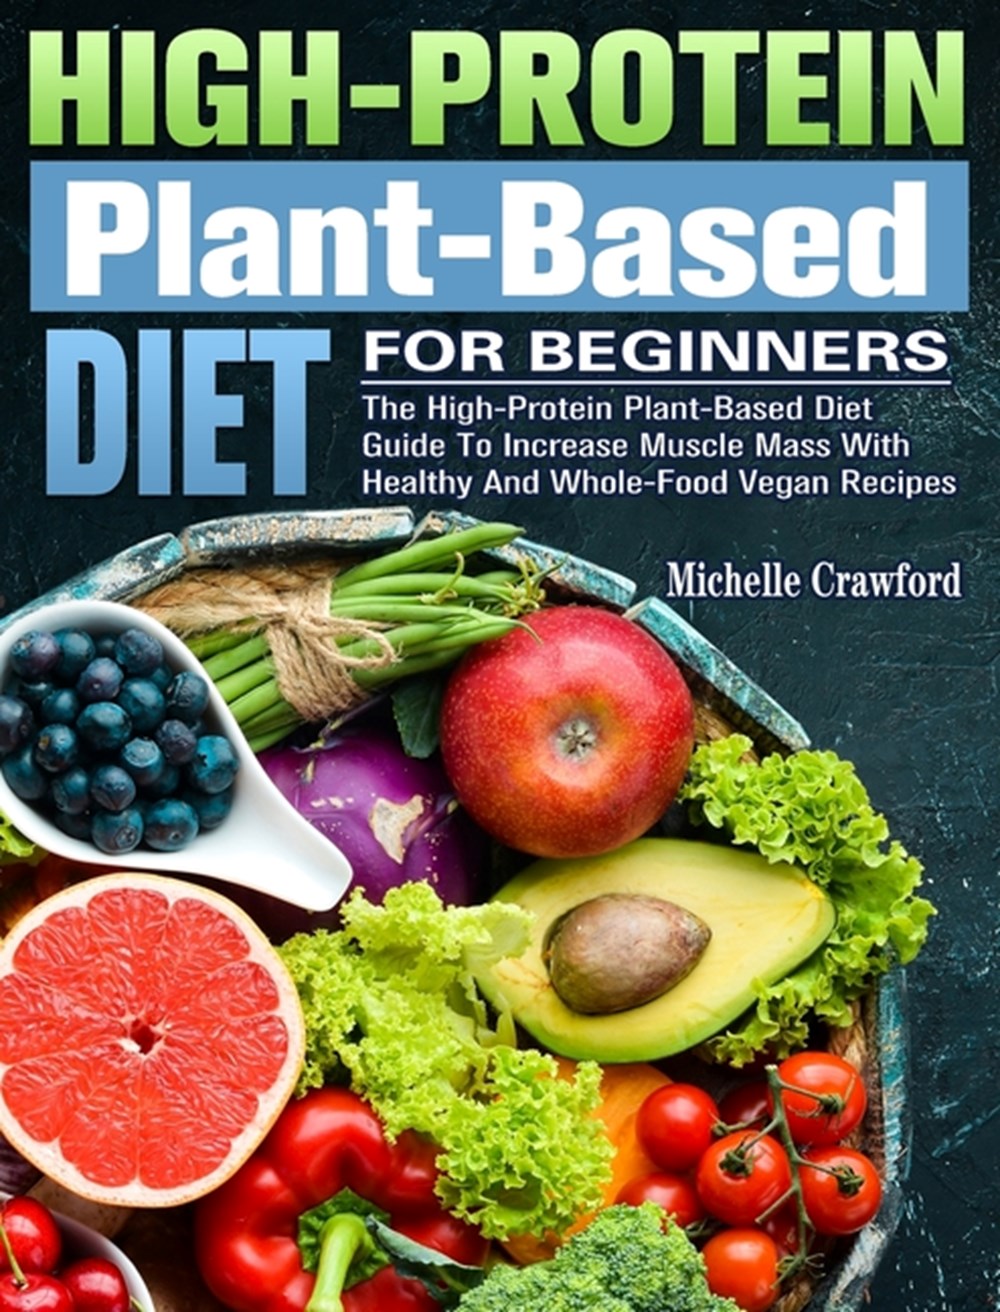 High-Protein Plant-Based Diet For Beginners The High-Protein Plant-Based Diet Guide To Increase Musc